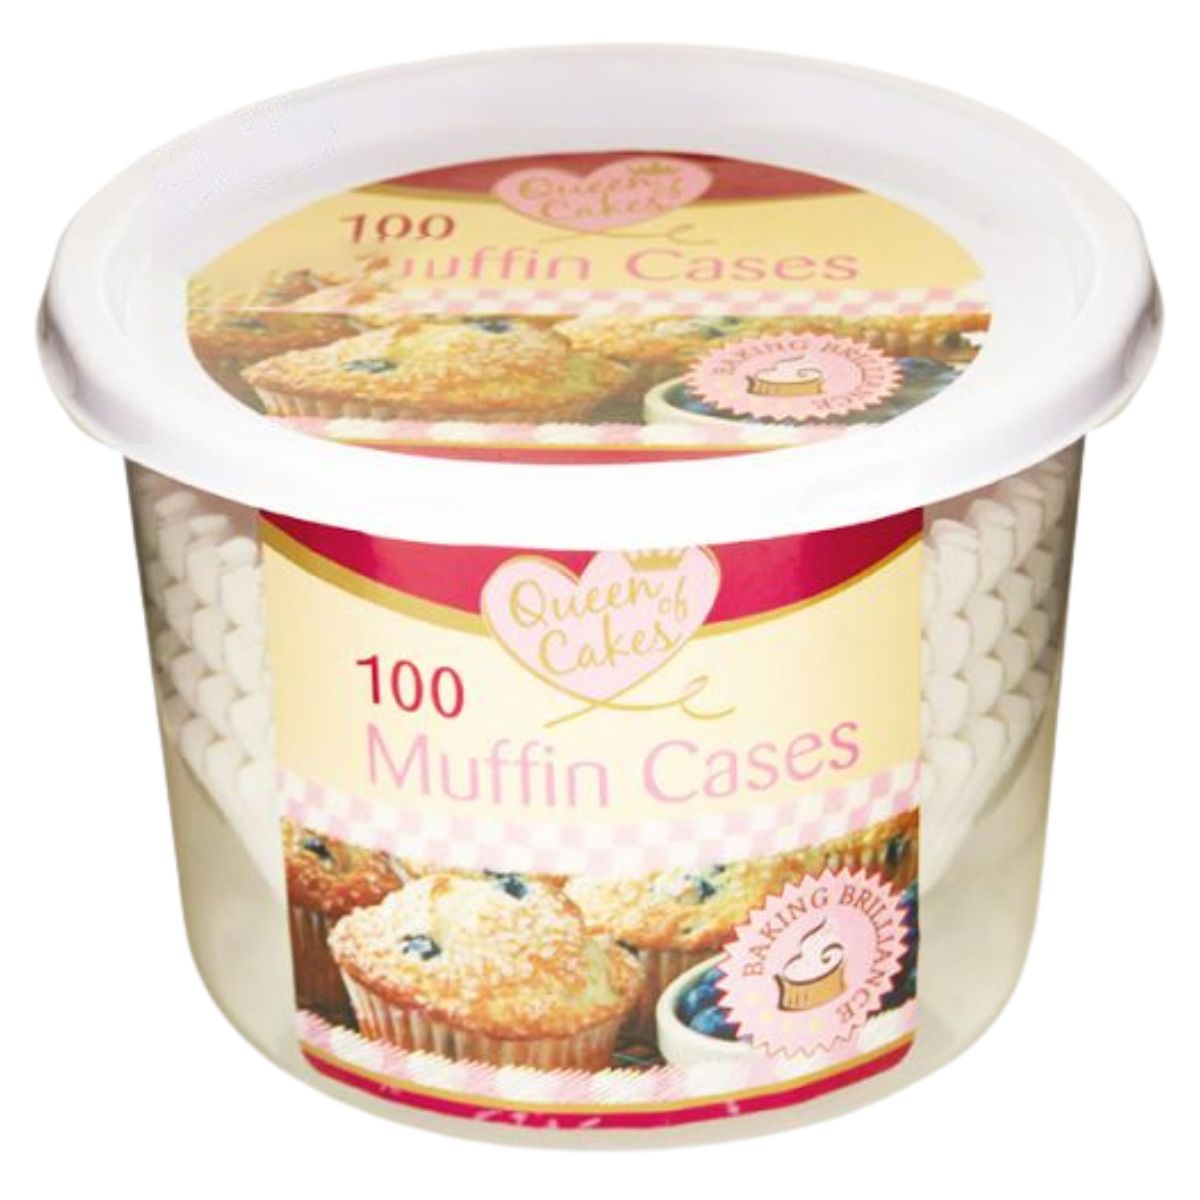 A tub of Queen Cakes - Muffin Cases - 125s containing 100 pieces.